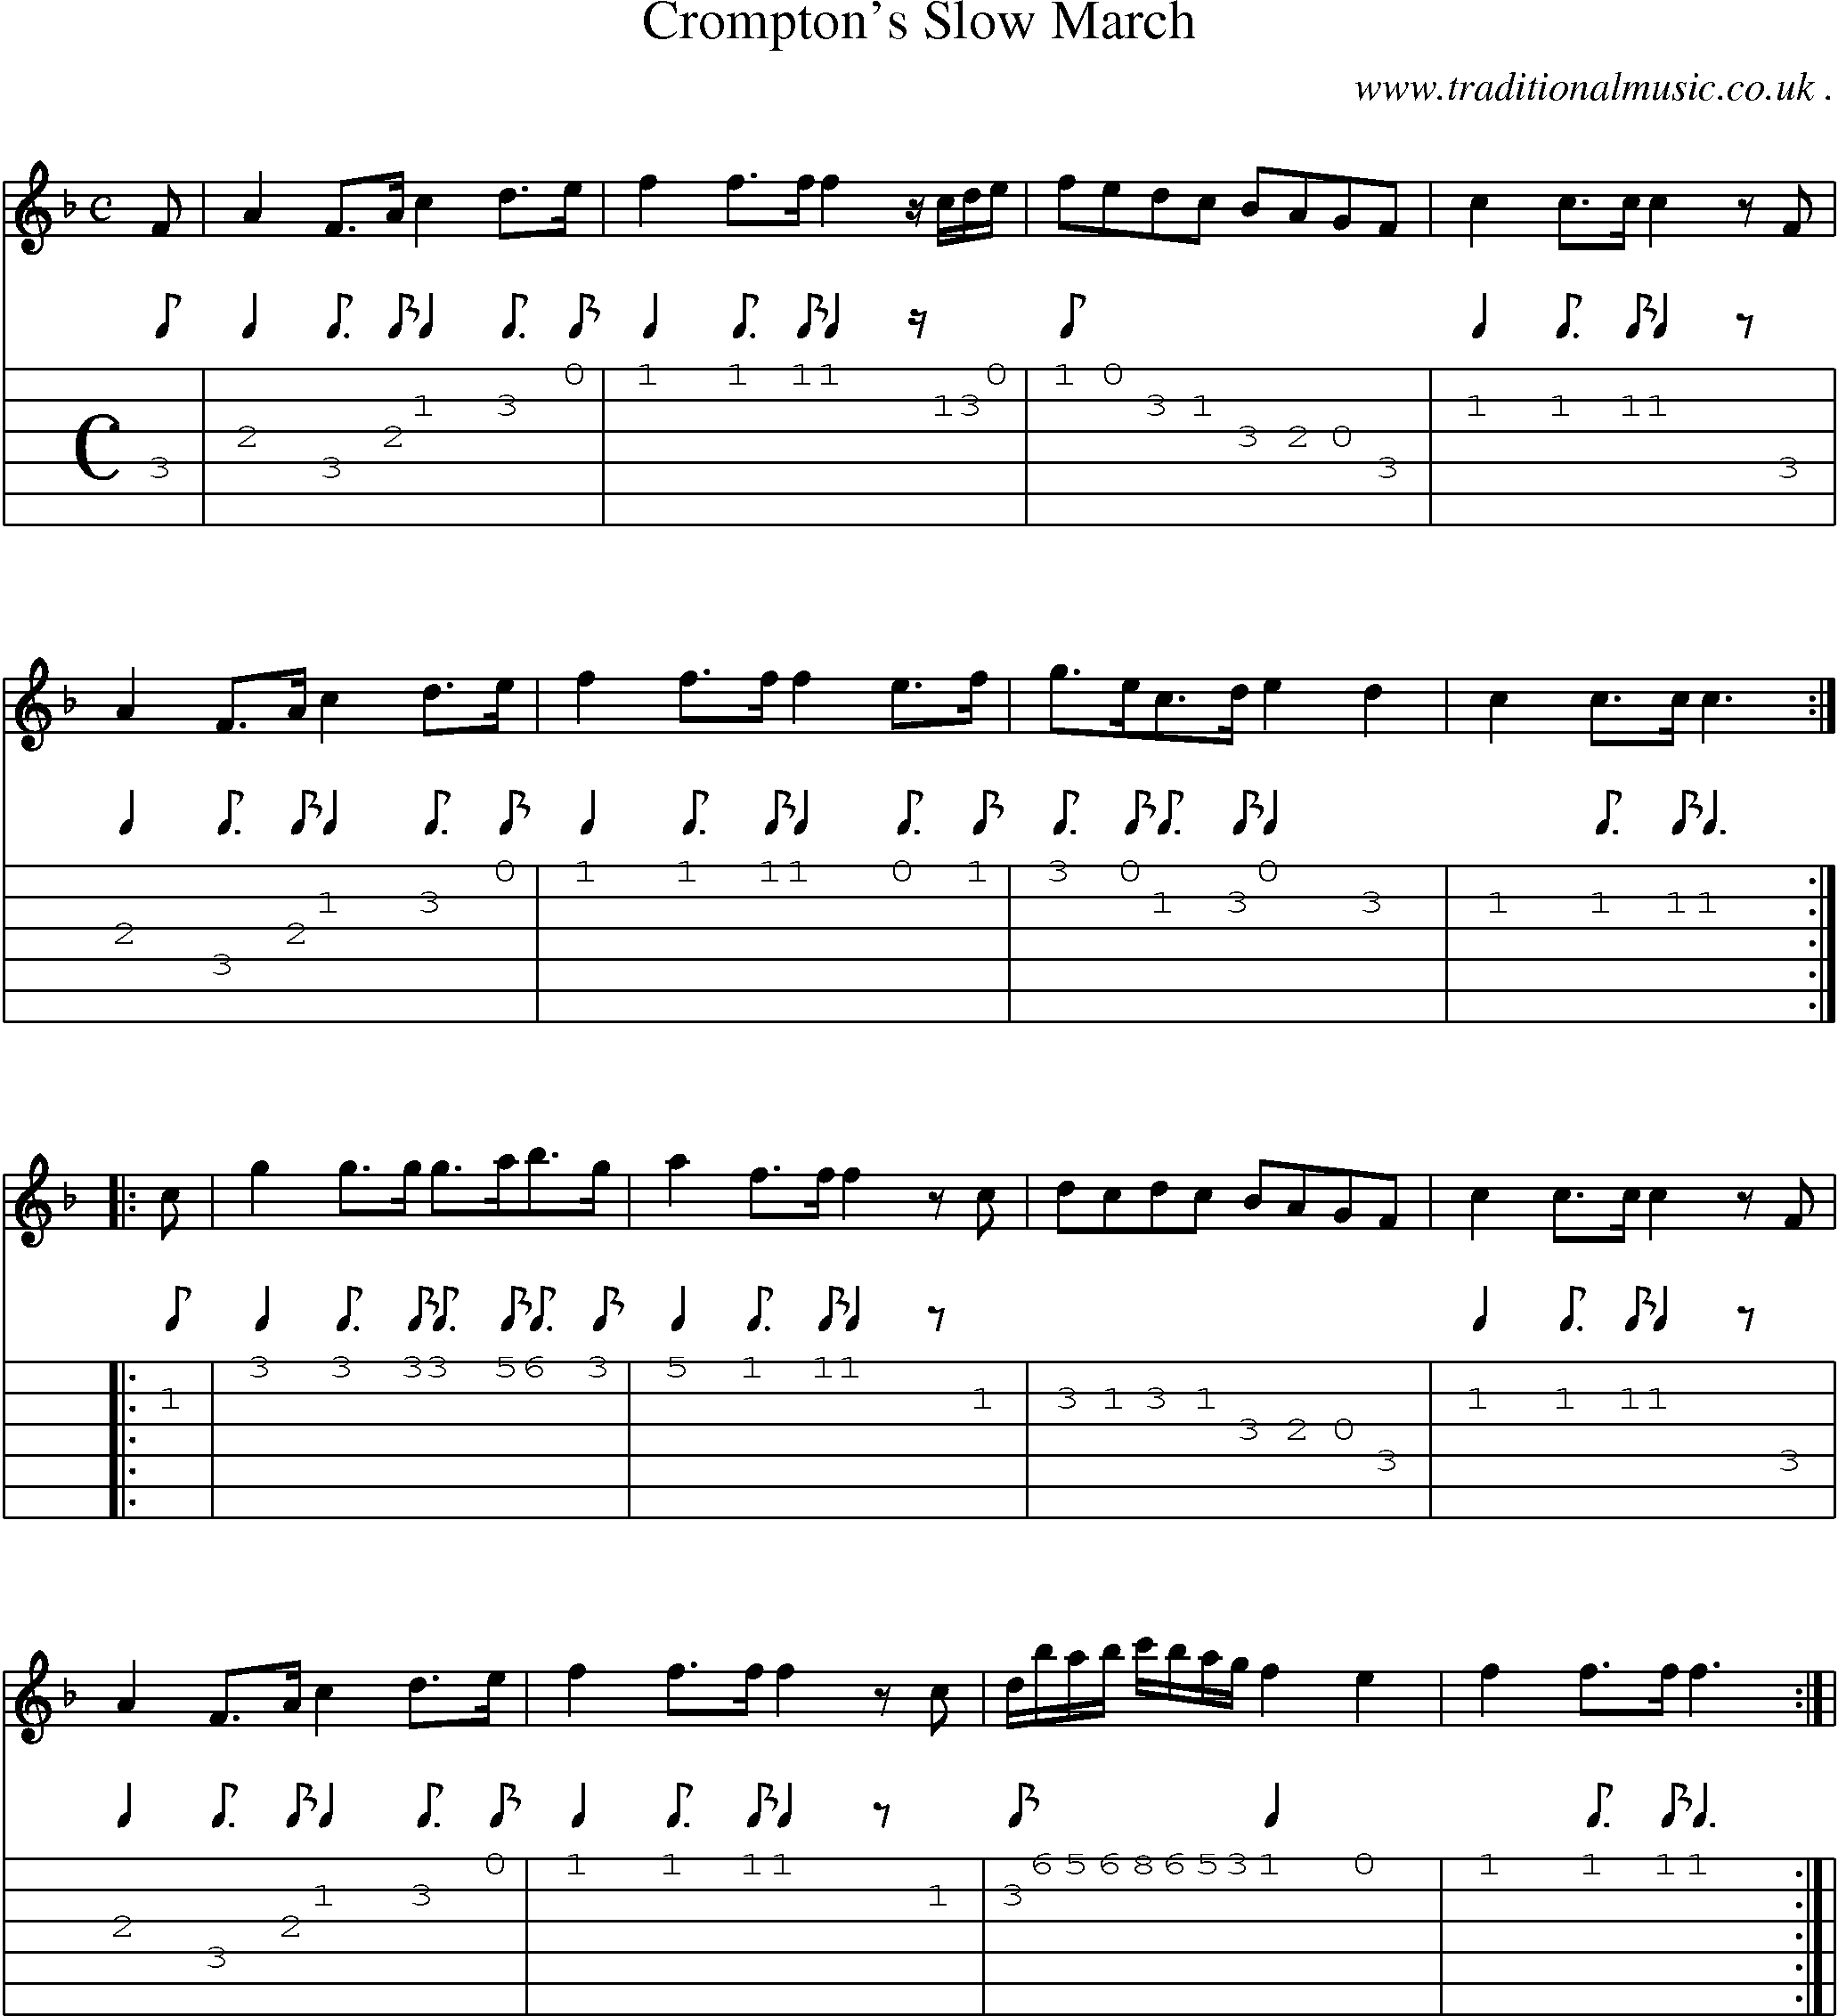 Sheet-Music and Guitar Tabs for Cromptons Slow March